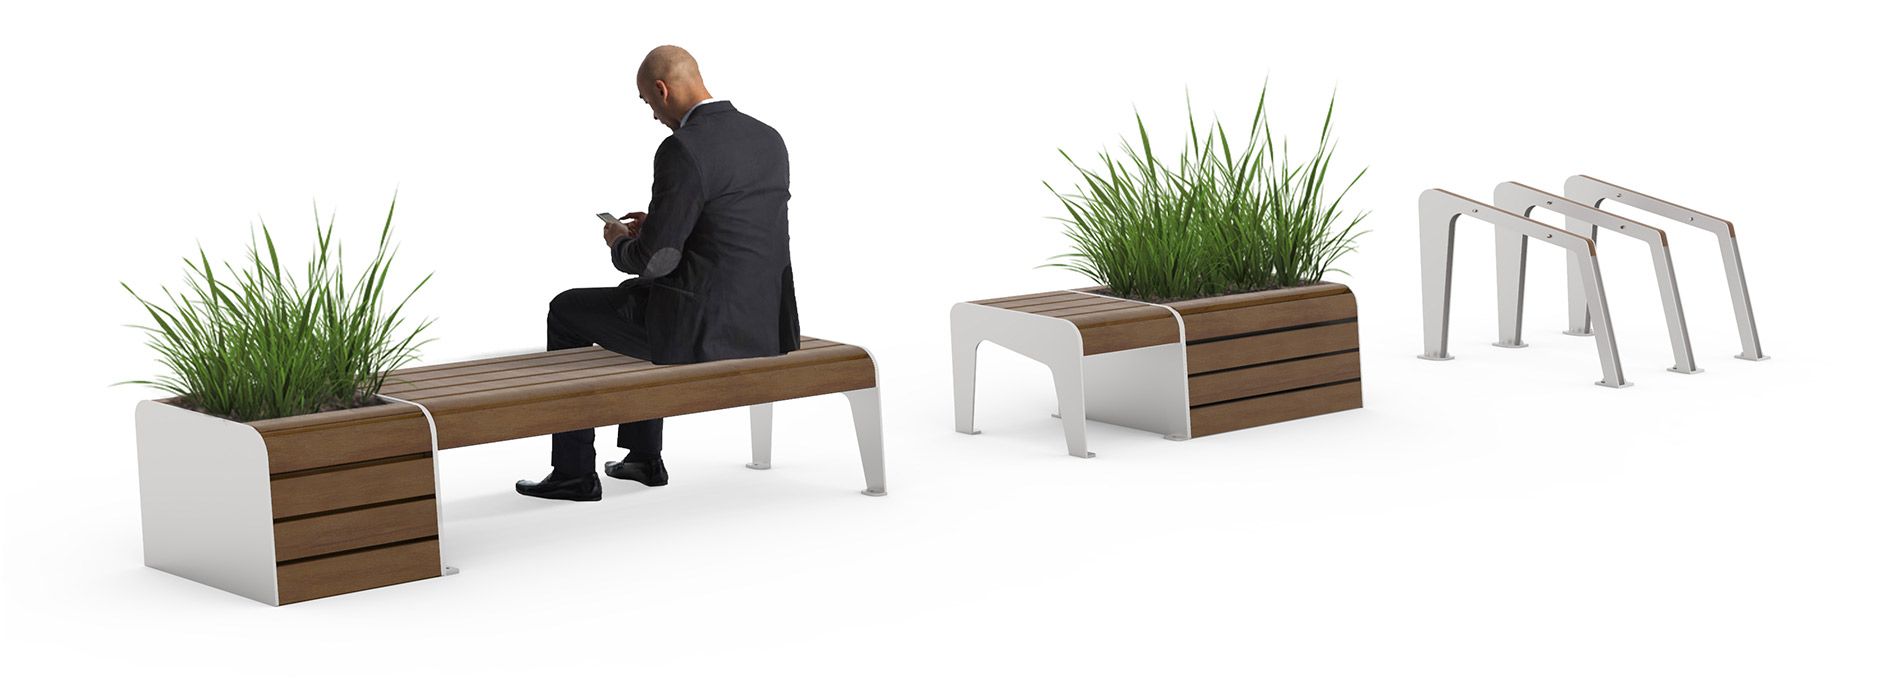 Contemporary street furniture made of steel and wood